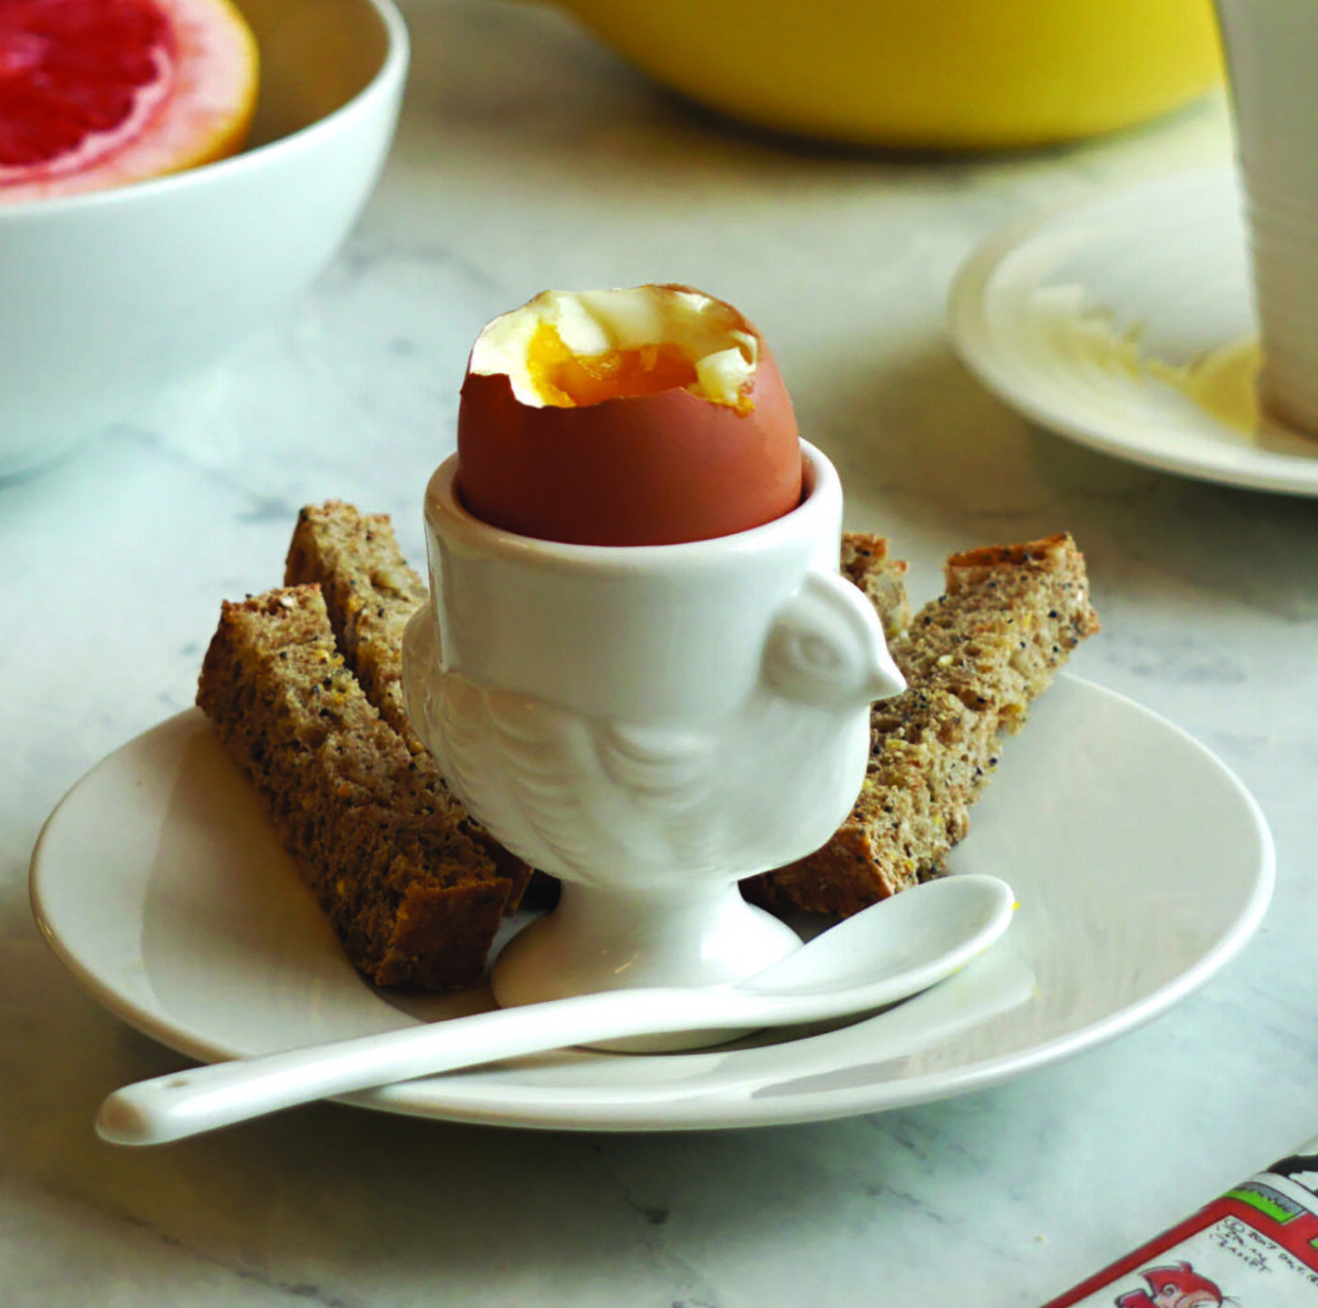 Porcelain Egg Cup & Spoon Set in White – 8 pc set